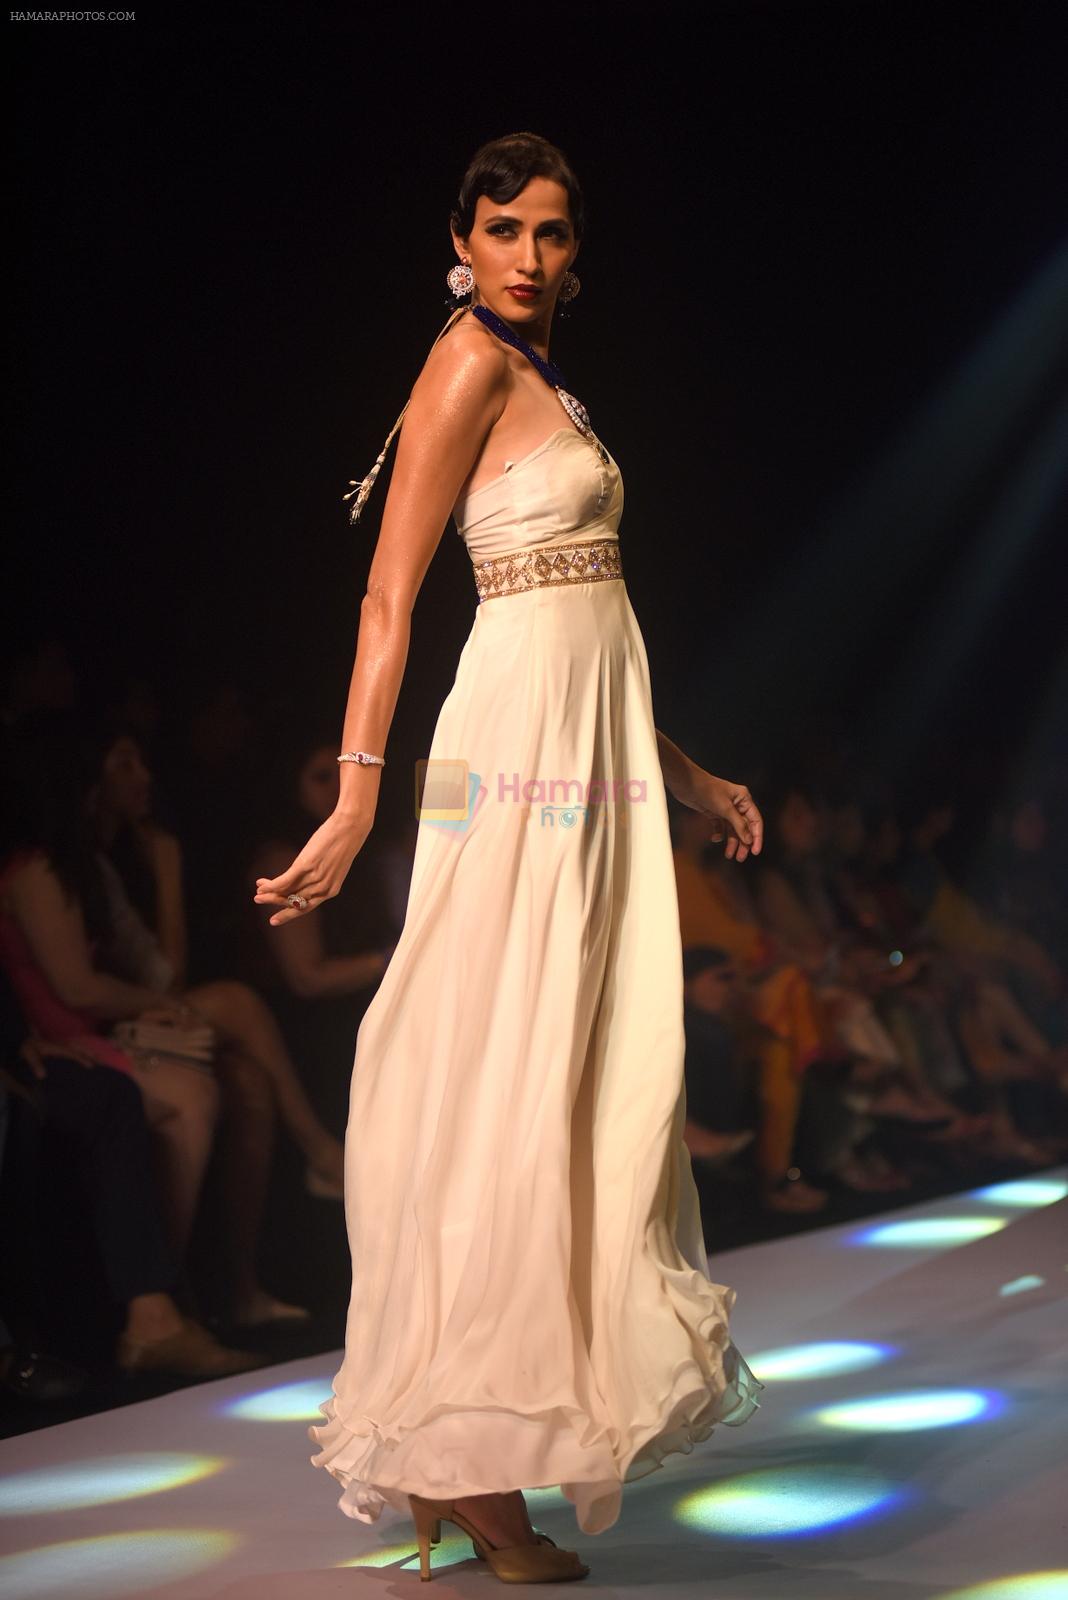 Model walk for Manali Jagtap Show at IIJW 2015 on 4th Aug 2015